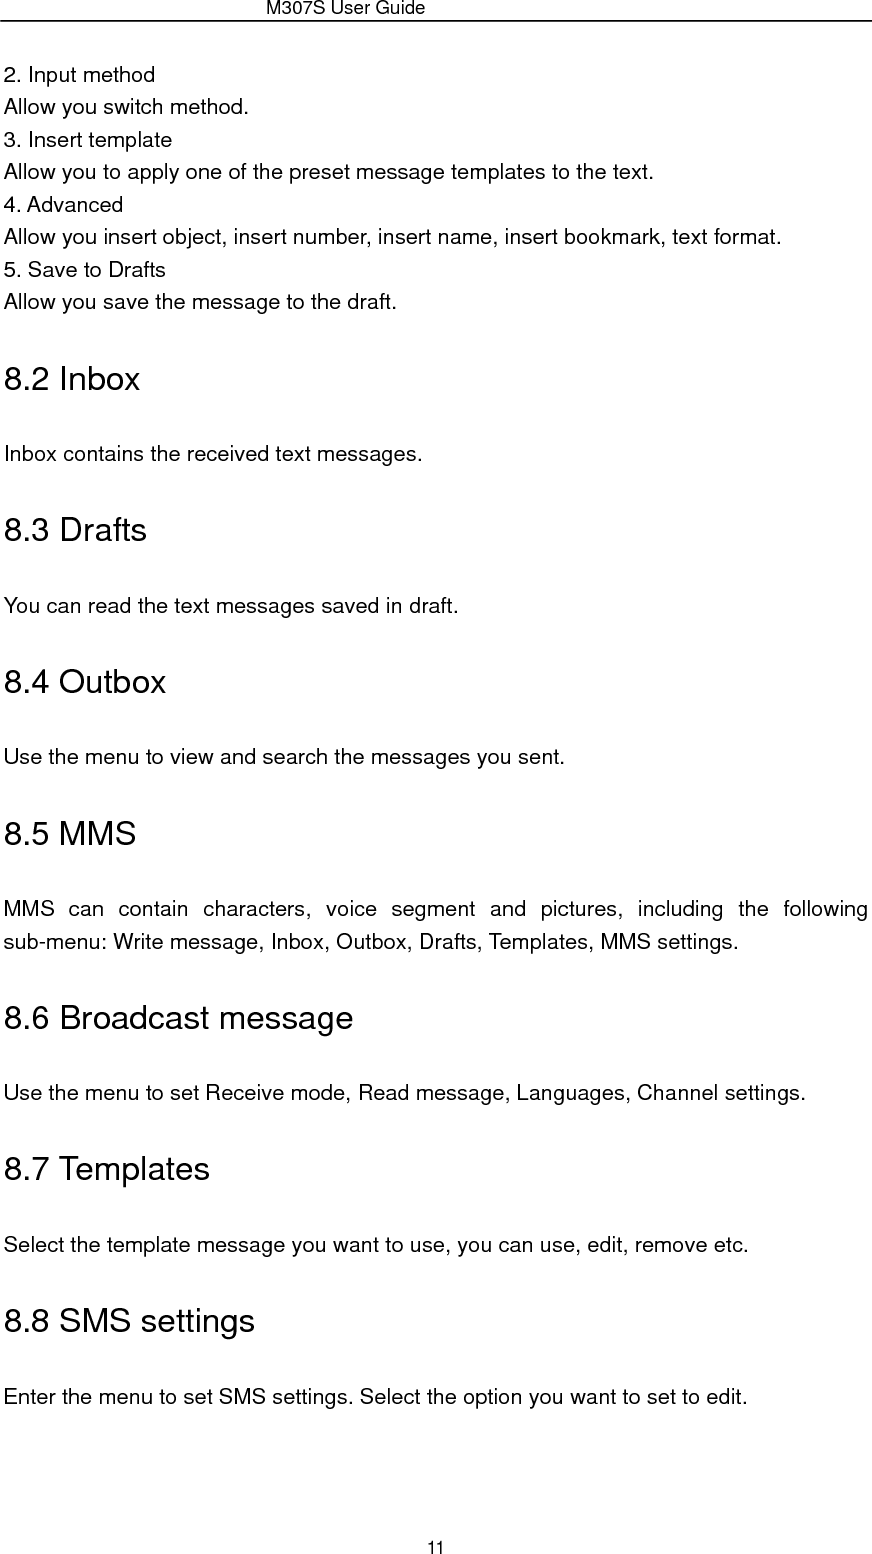                 M307S User Guide 11 2. Input method Allow you switch method. 3. Insert template Allow you to apply one of the preset message templates to the text. 4. Advanced Allow you insert object, insert number, insert name, insert bookmark, text format. 5. Save to Drafts Allow you save the message to the draft. 8.2 Inbox Inbox contains the received text messages. 8.3 Drafts You can read the text messages saved in draft. 8.4 Outbox Use the menu to view and search the messages you sent. 8.5 MMS MMS can contain characters, voice segment and pictures, including the following sub-menu: Write message, Inbox, Outbox, Drafts, Templates, MMS settings. 8.6 Broadcast message Use the menu to set Receive mode, Read message, Languages, Channel settings. 8.7 Templates Select the template message you want to use, you can use, edit, remove etc. 8.8 SMS settings Enter the menu to set SMS settings. Select the option you want to set to edit. 